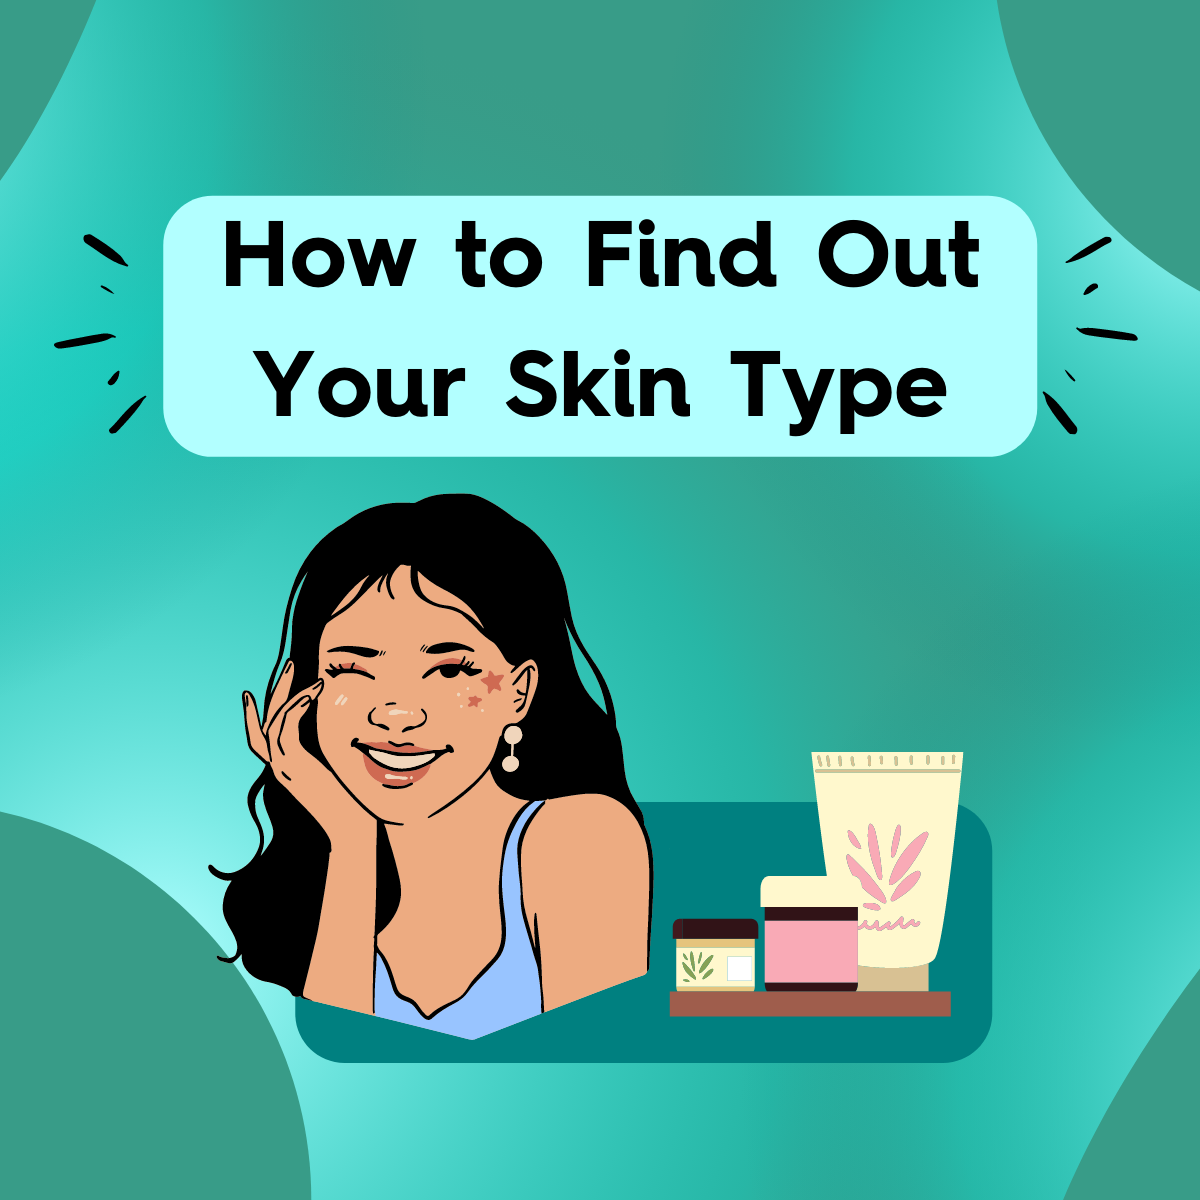 How to Find Out Your Skin Type